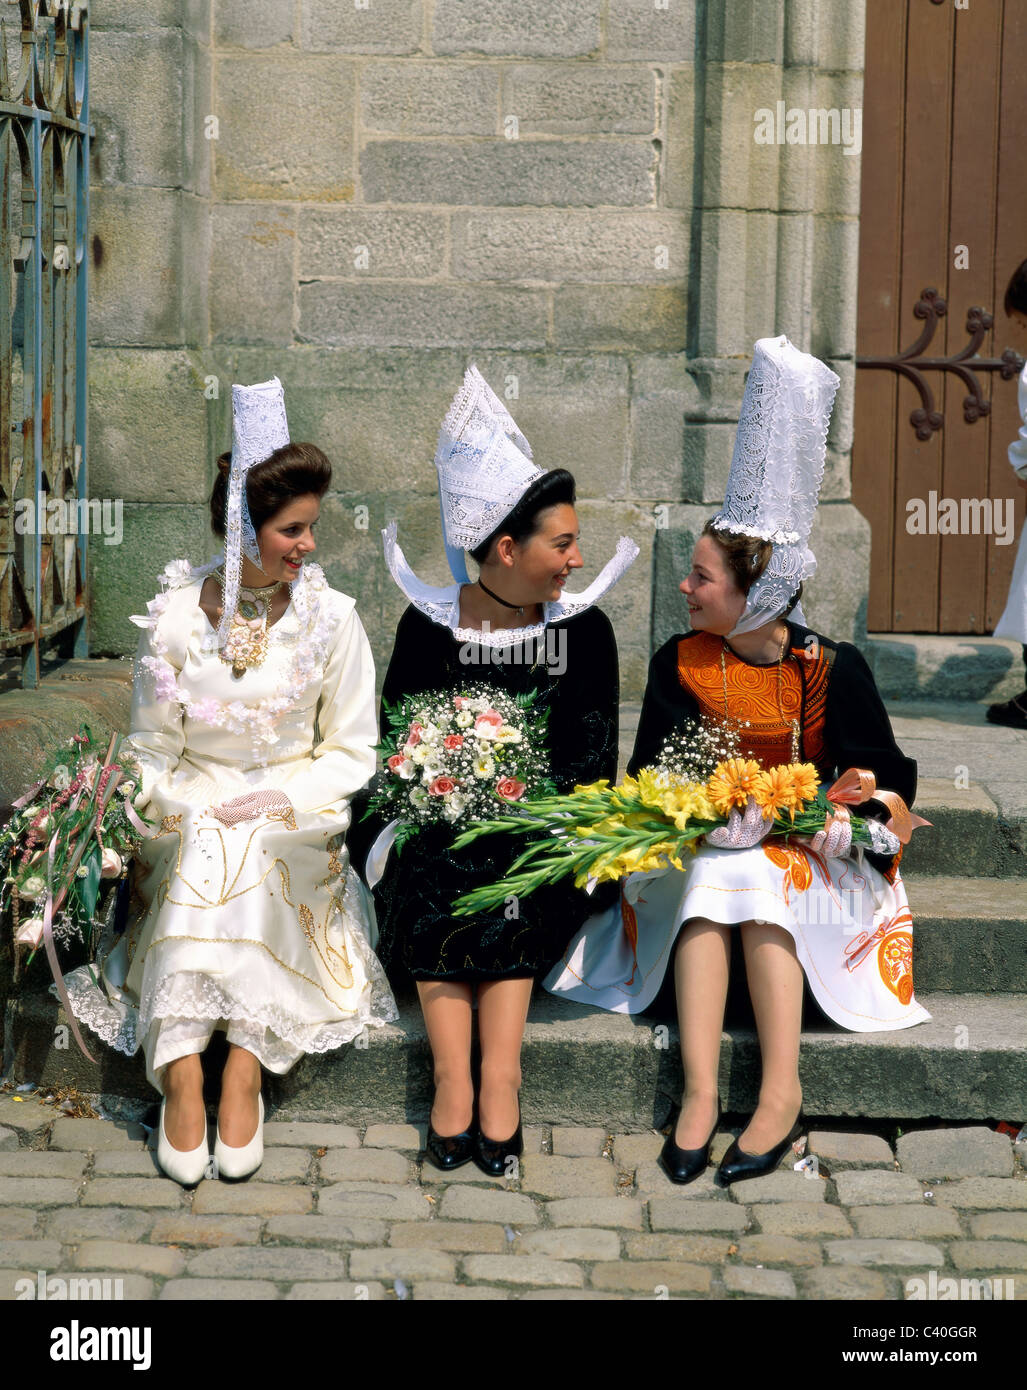 Brittany, Costumes, Europe, European, Flowers, France, Europe, French ...